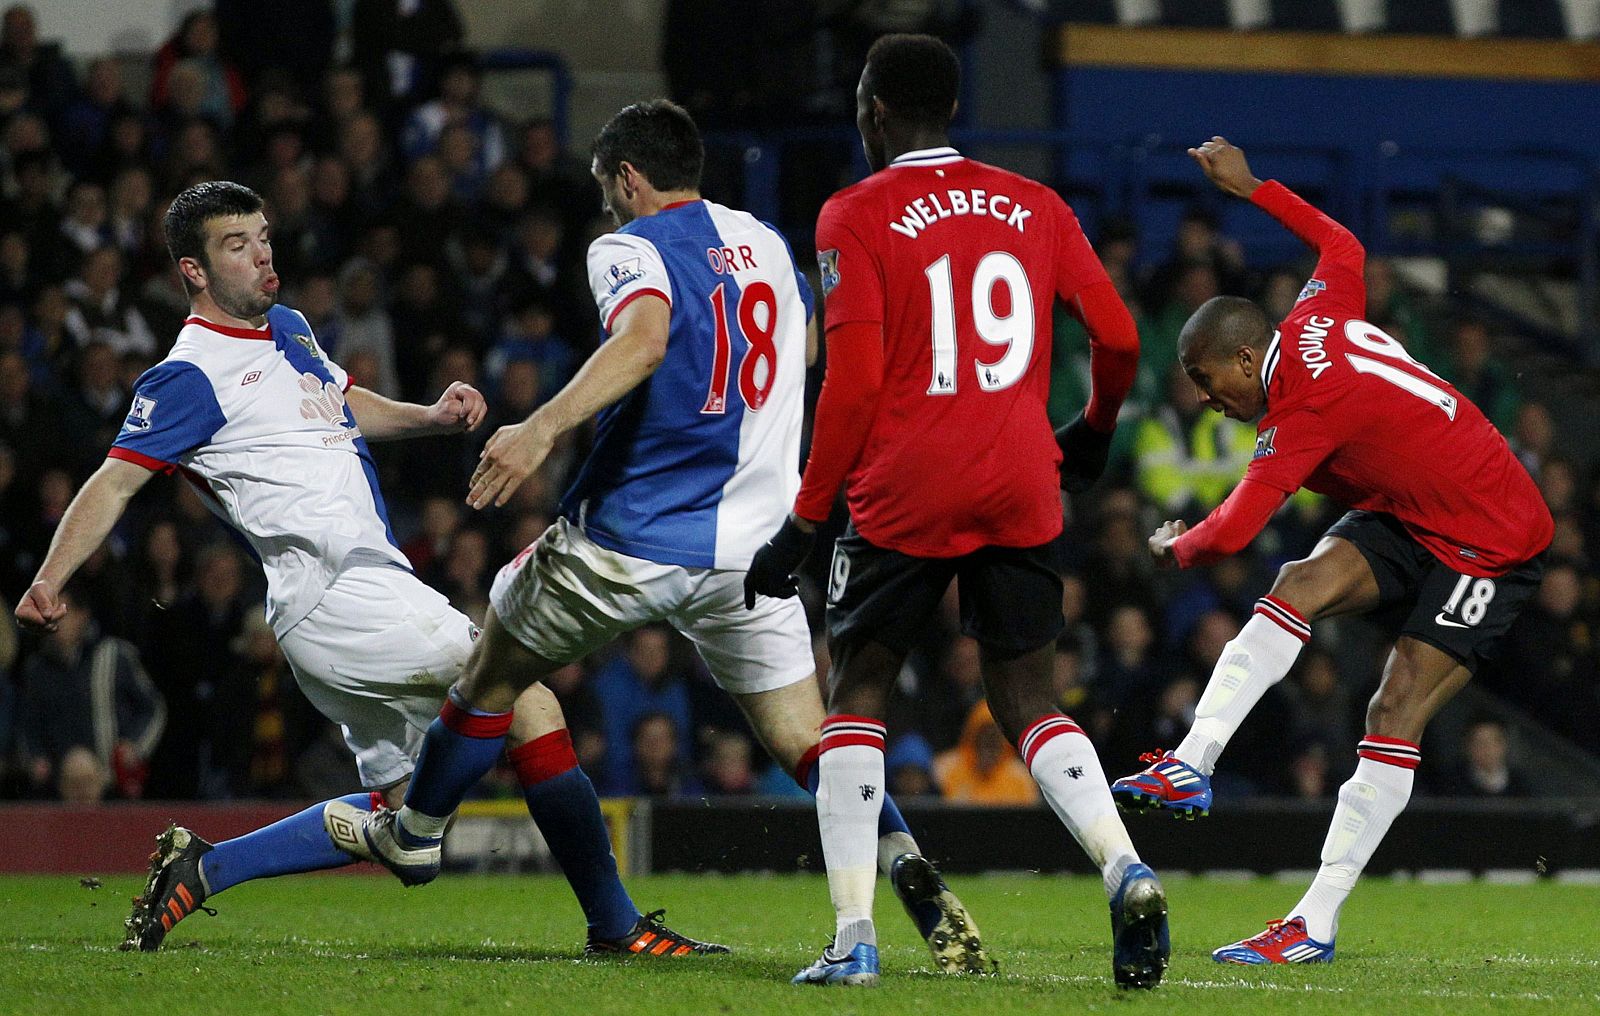 Manchester United's Young scores against Blackburn Rovers during their English Premier League soccer match in Blackburn